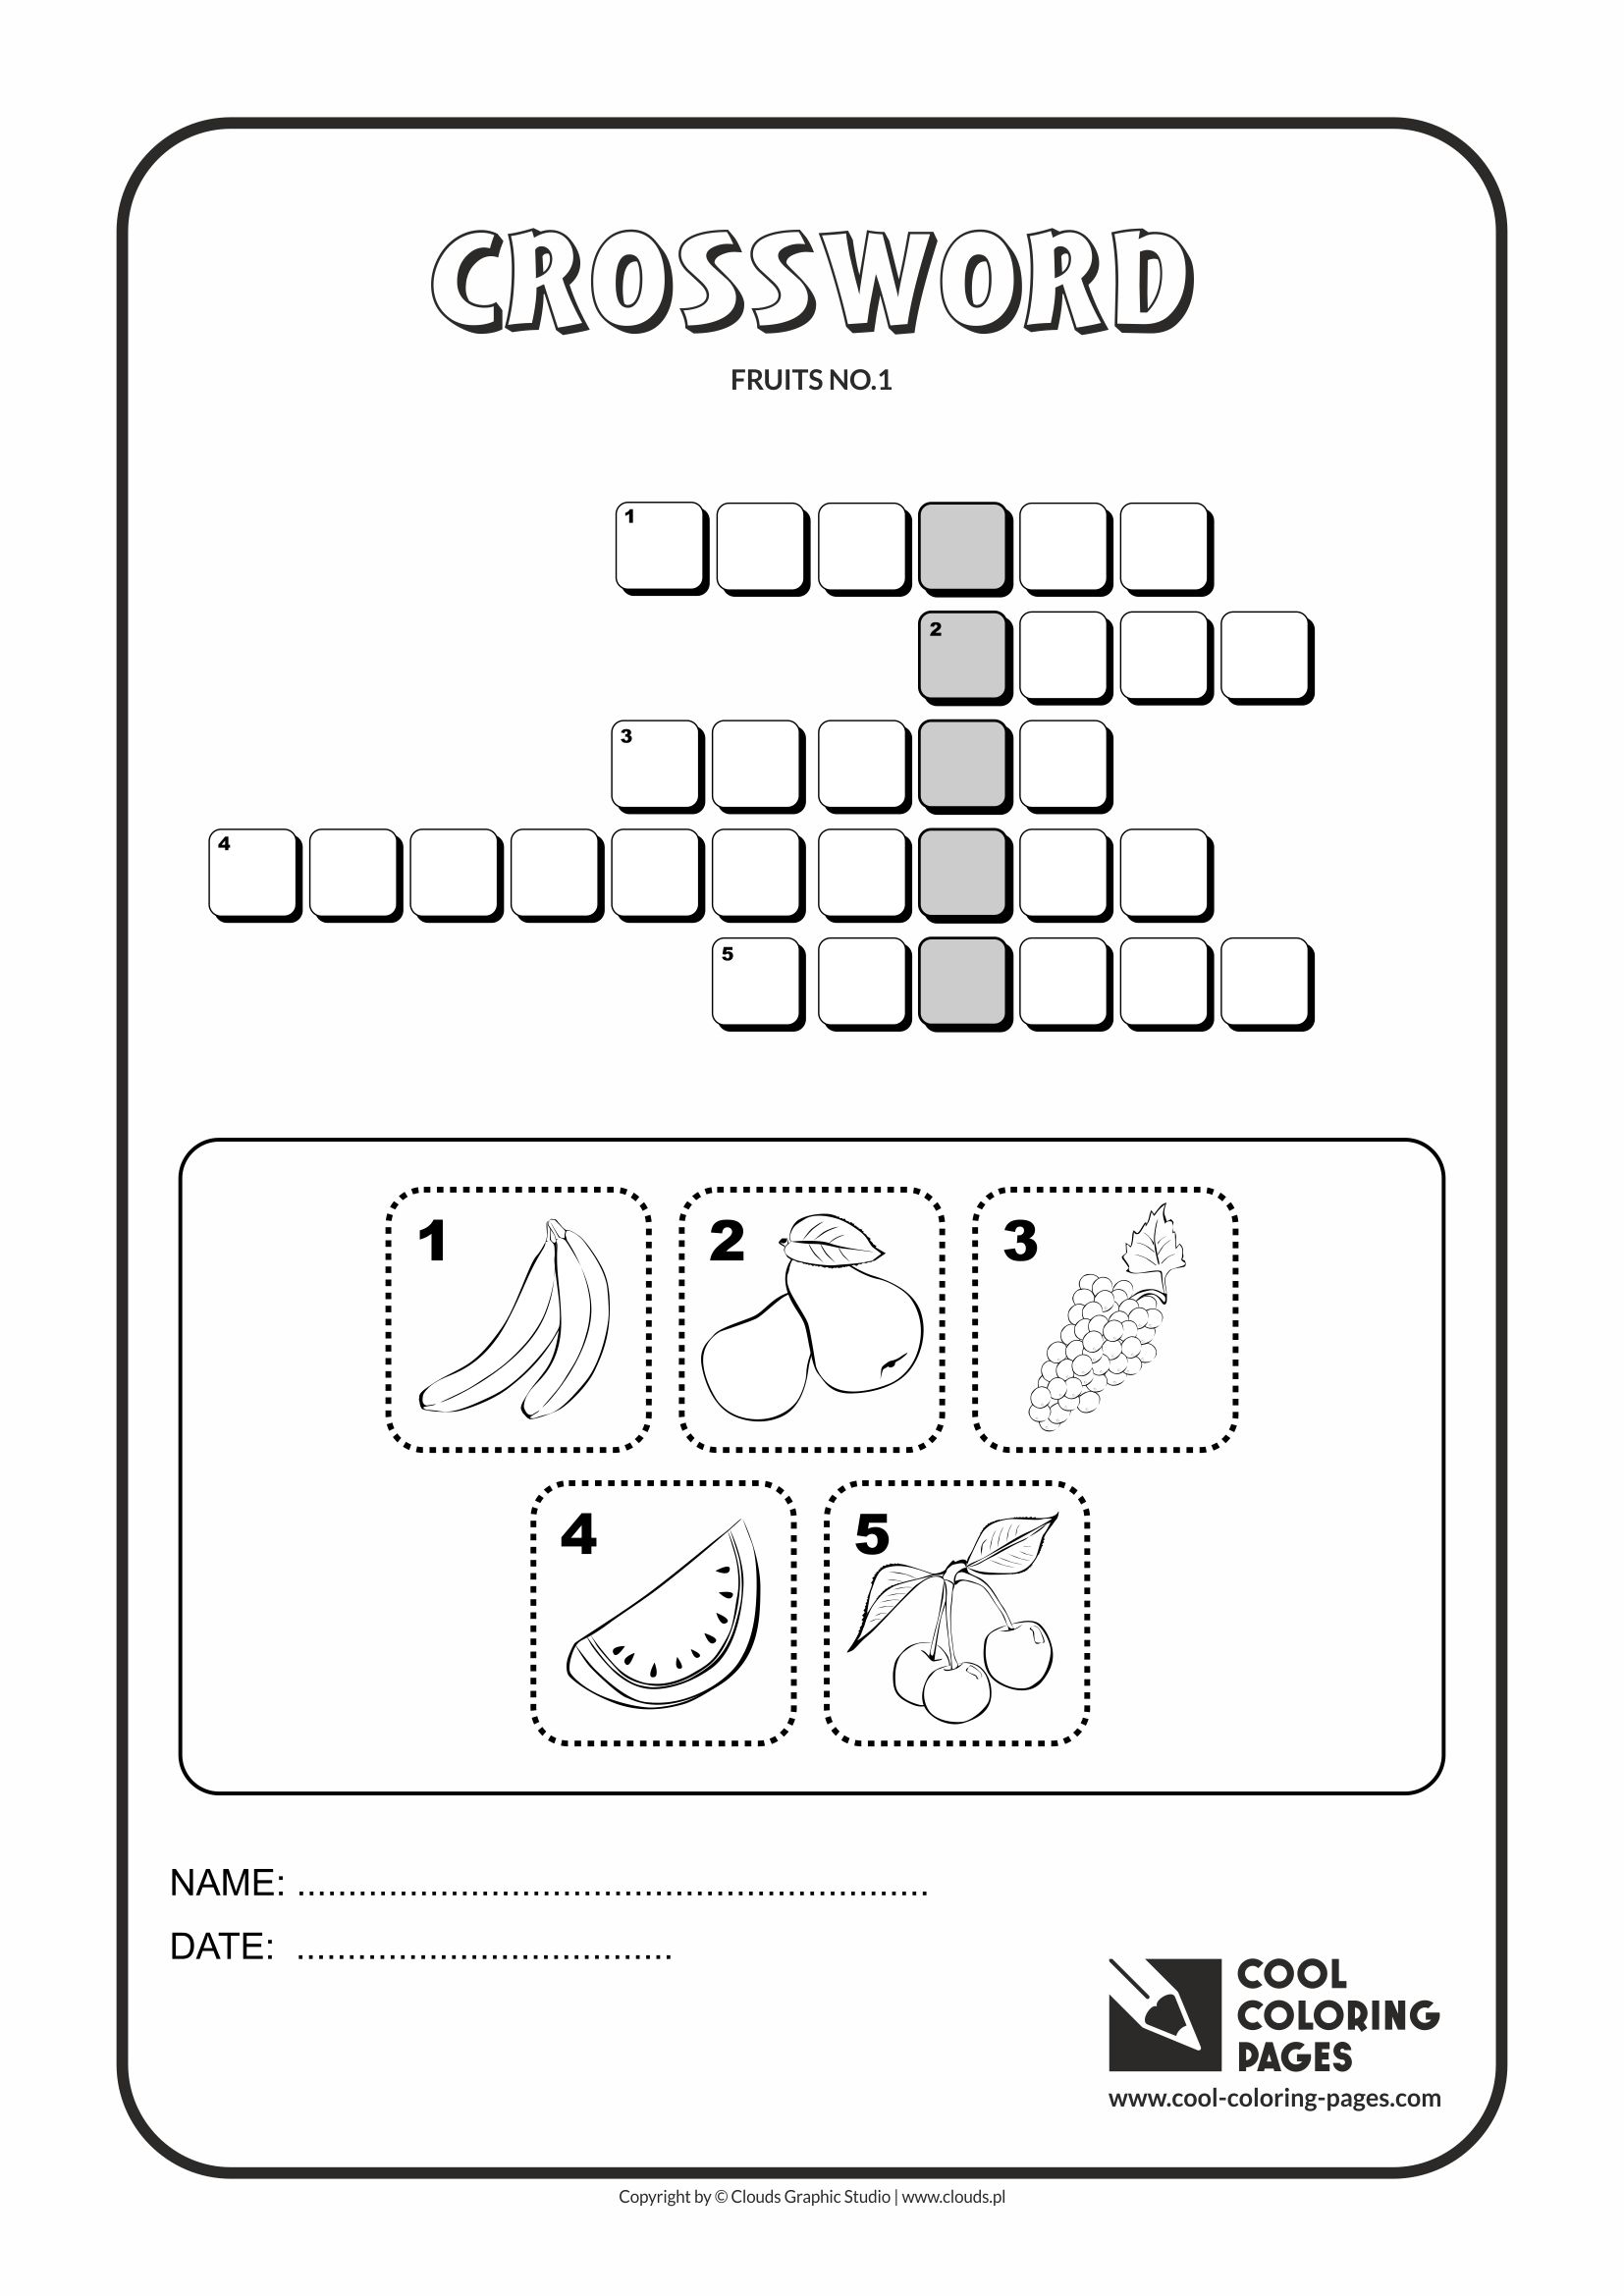 Cool Coloring Pages -Crosswords / Crossword fruits no 1